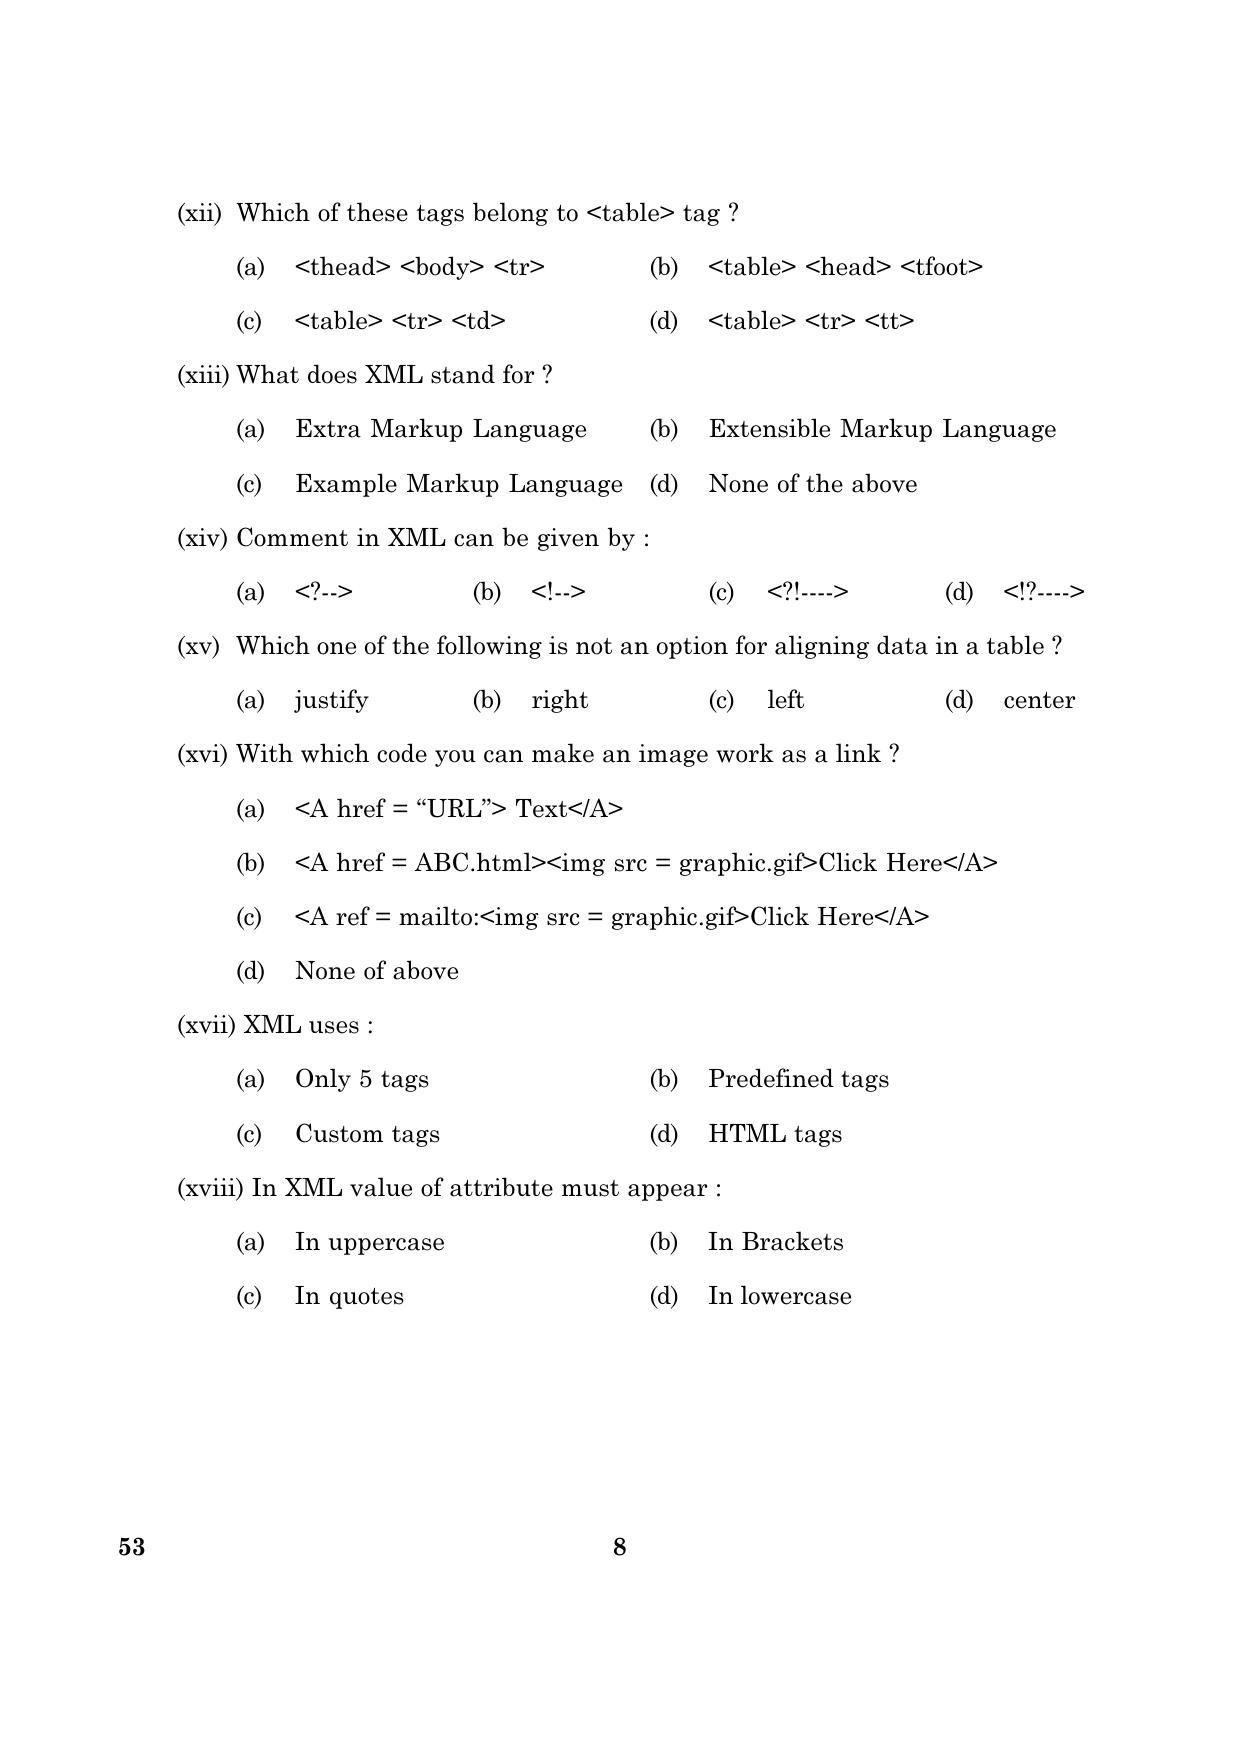 CBSE Class 10 053 Foundation Of Information Technology 2016 Question Paper - Page 8